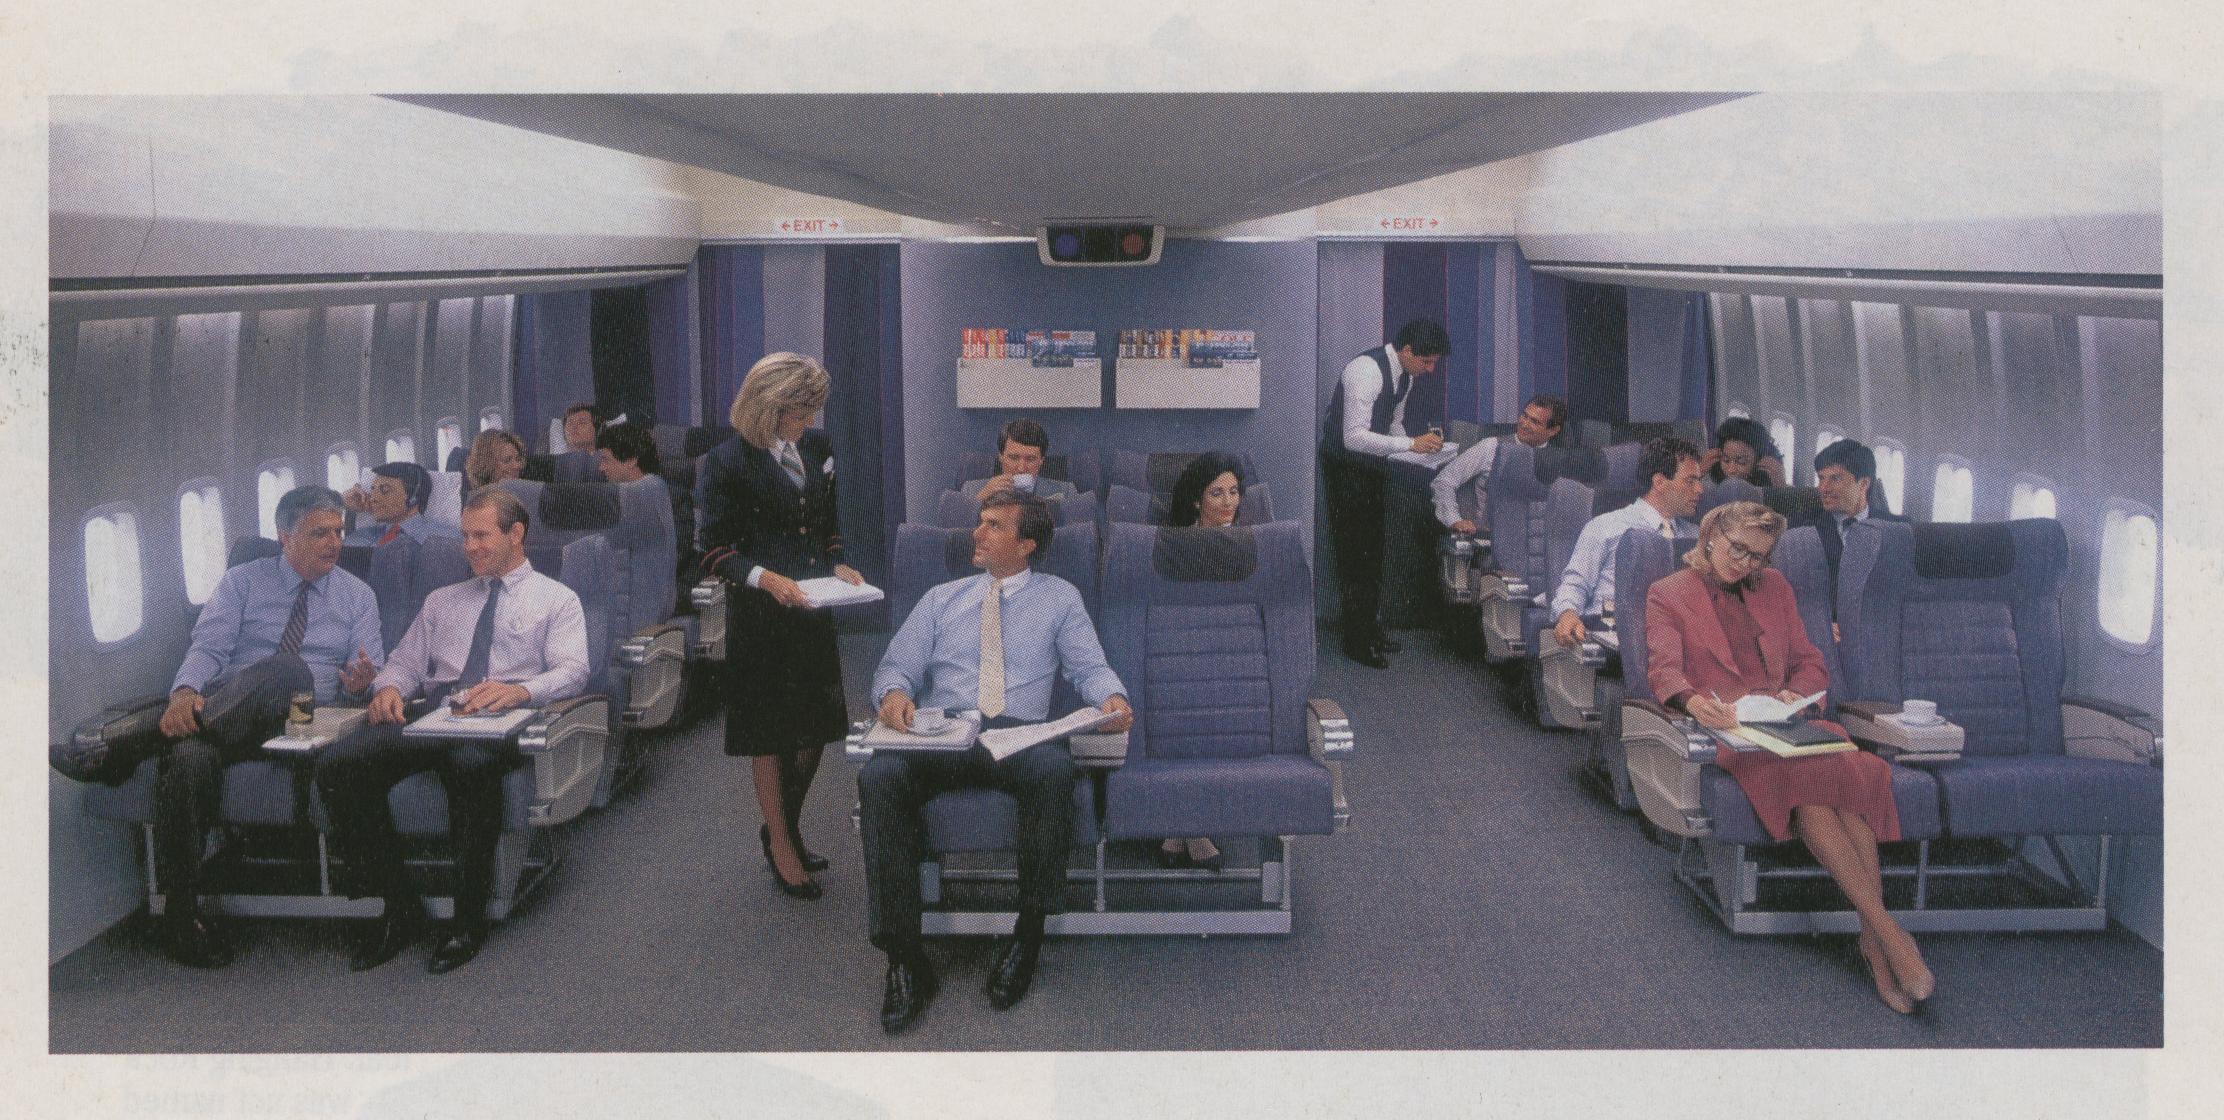 1990 A Pan Am 'Clipper Class' (business class) cabin with 6 across luxury seating.